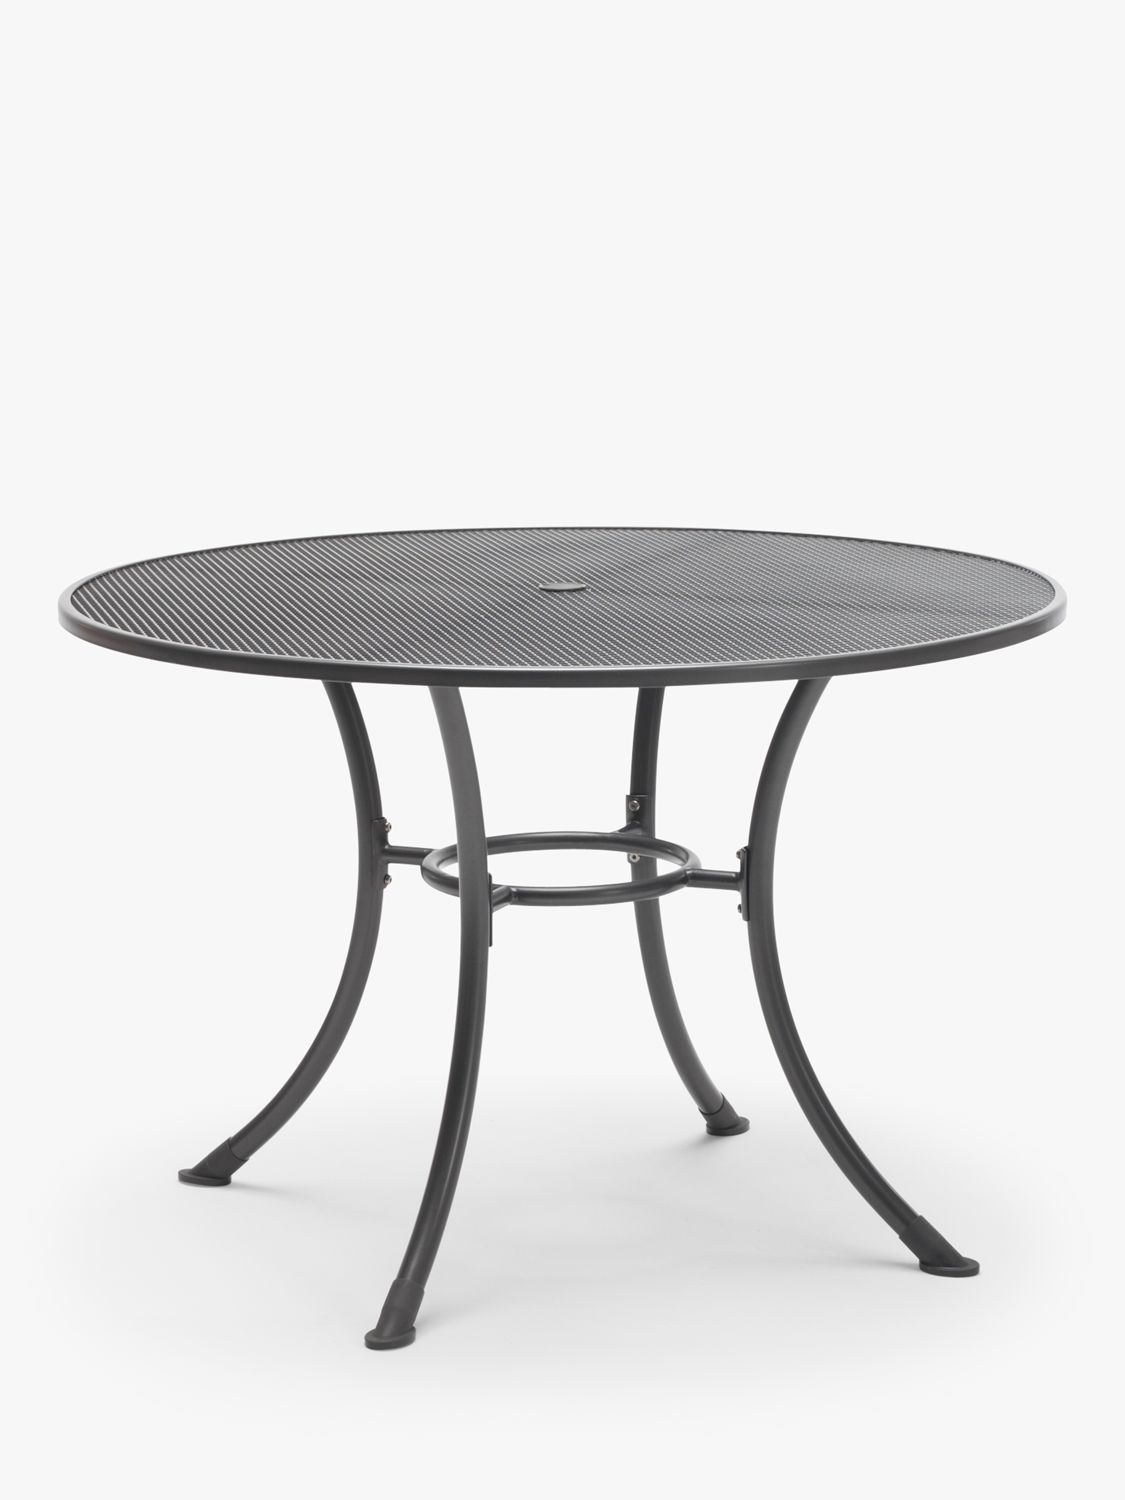 Henley by Kettler Round 4 Seater Outdoor Dining Table, width 110cm